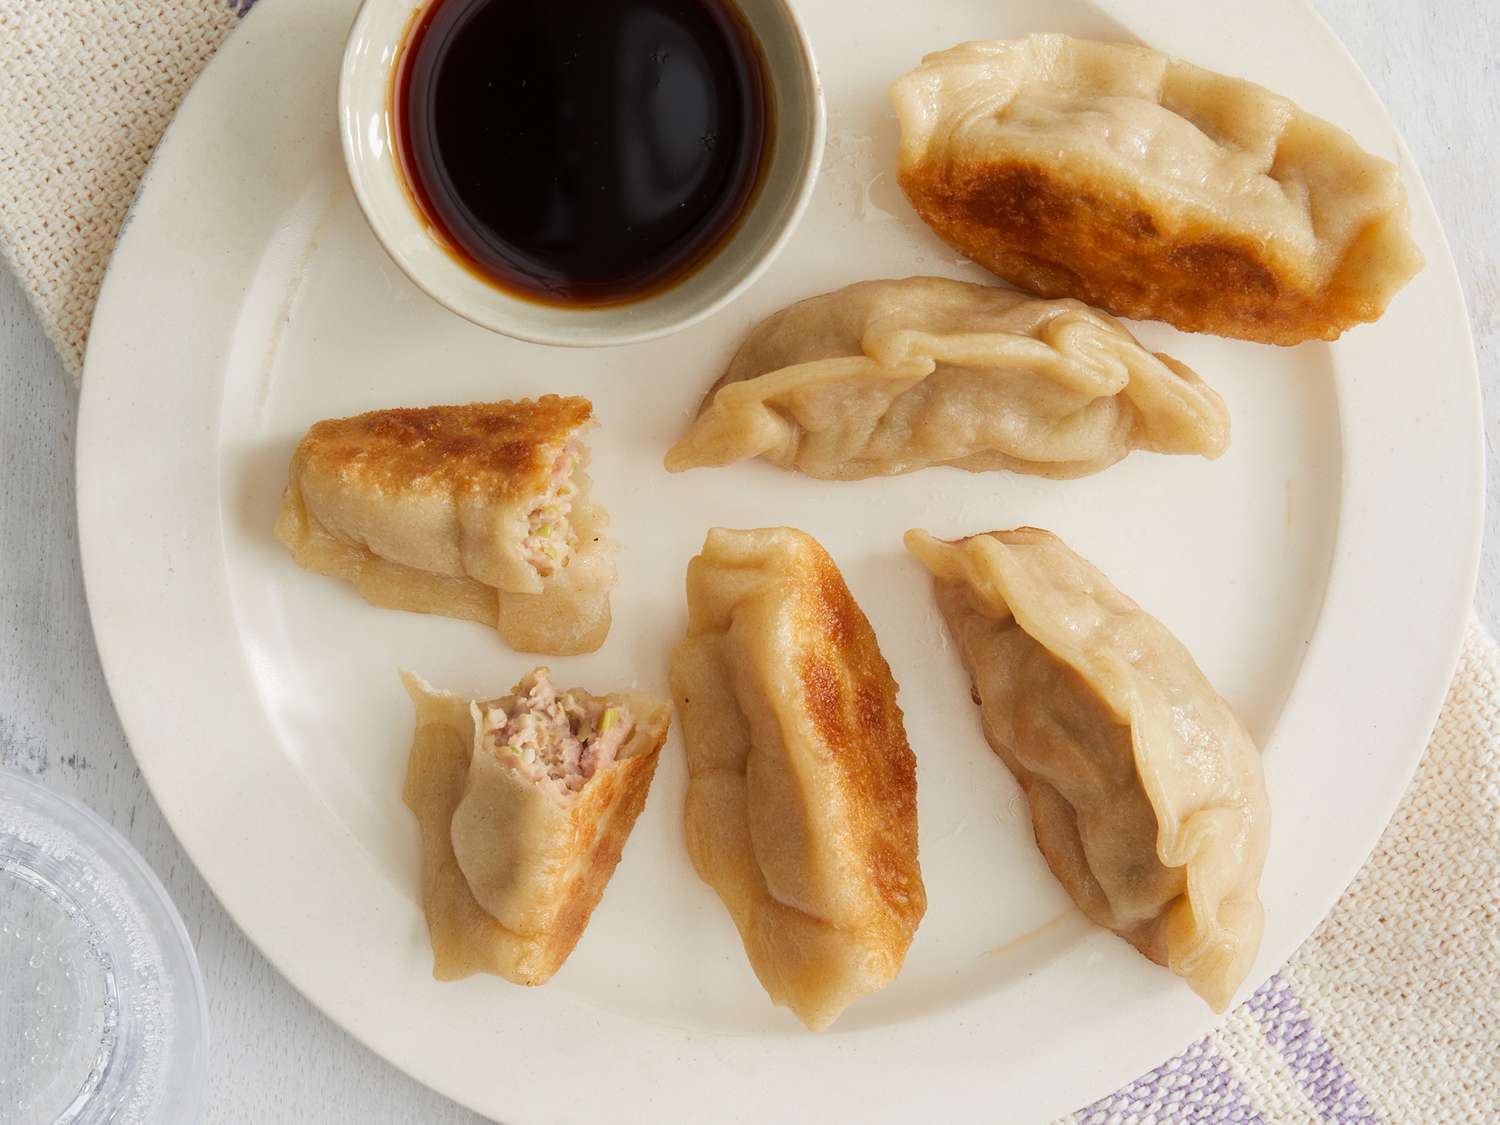 Looking down at a plate of golden brown potstickers with one cut open to see inside filling, with a side of dipping sauce